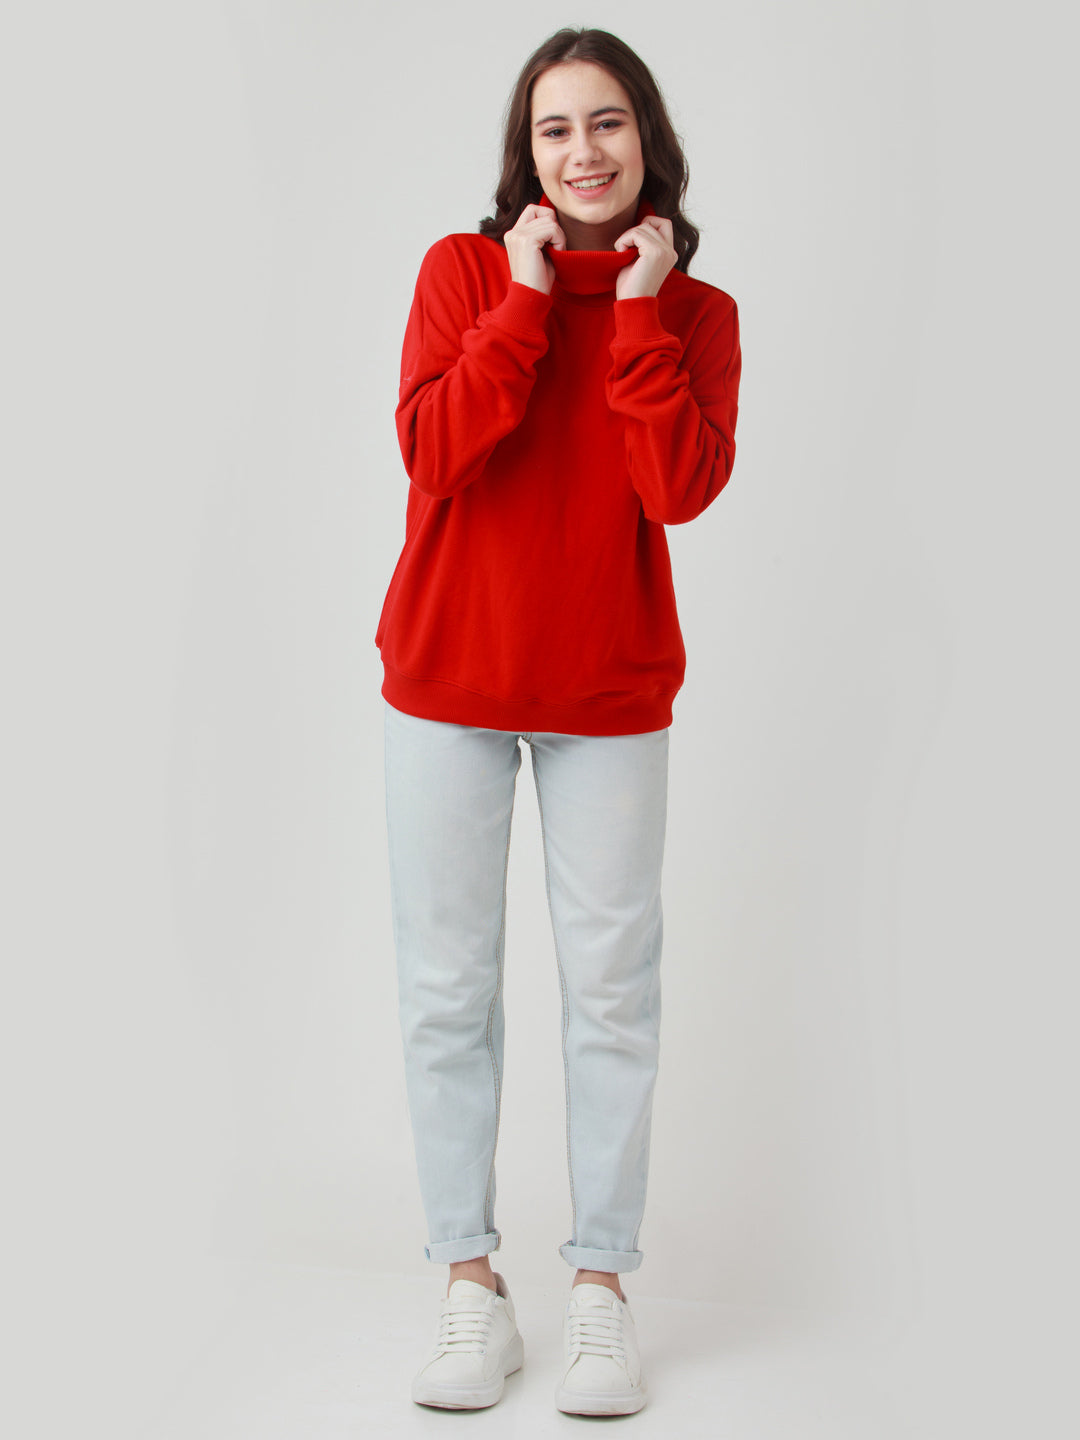 Red Solid Straight Sweatshirt For Women